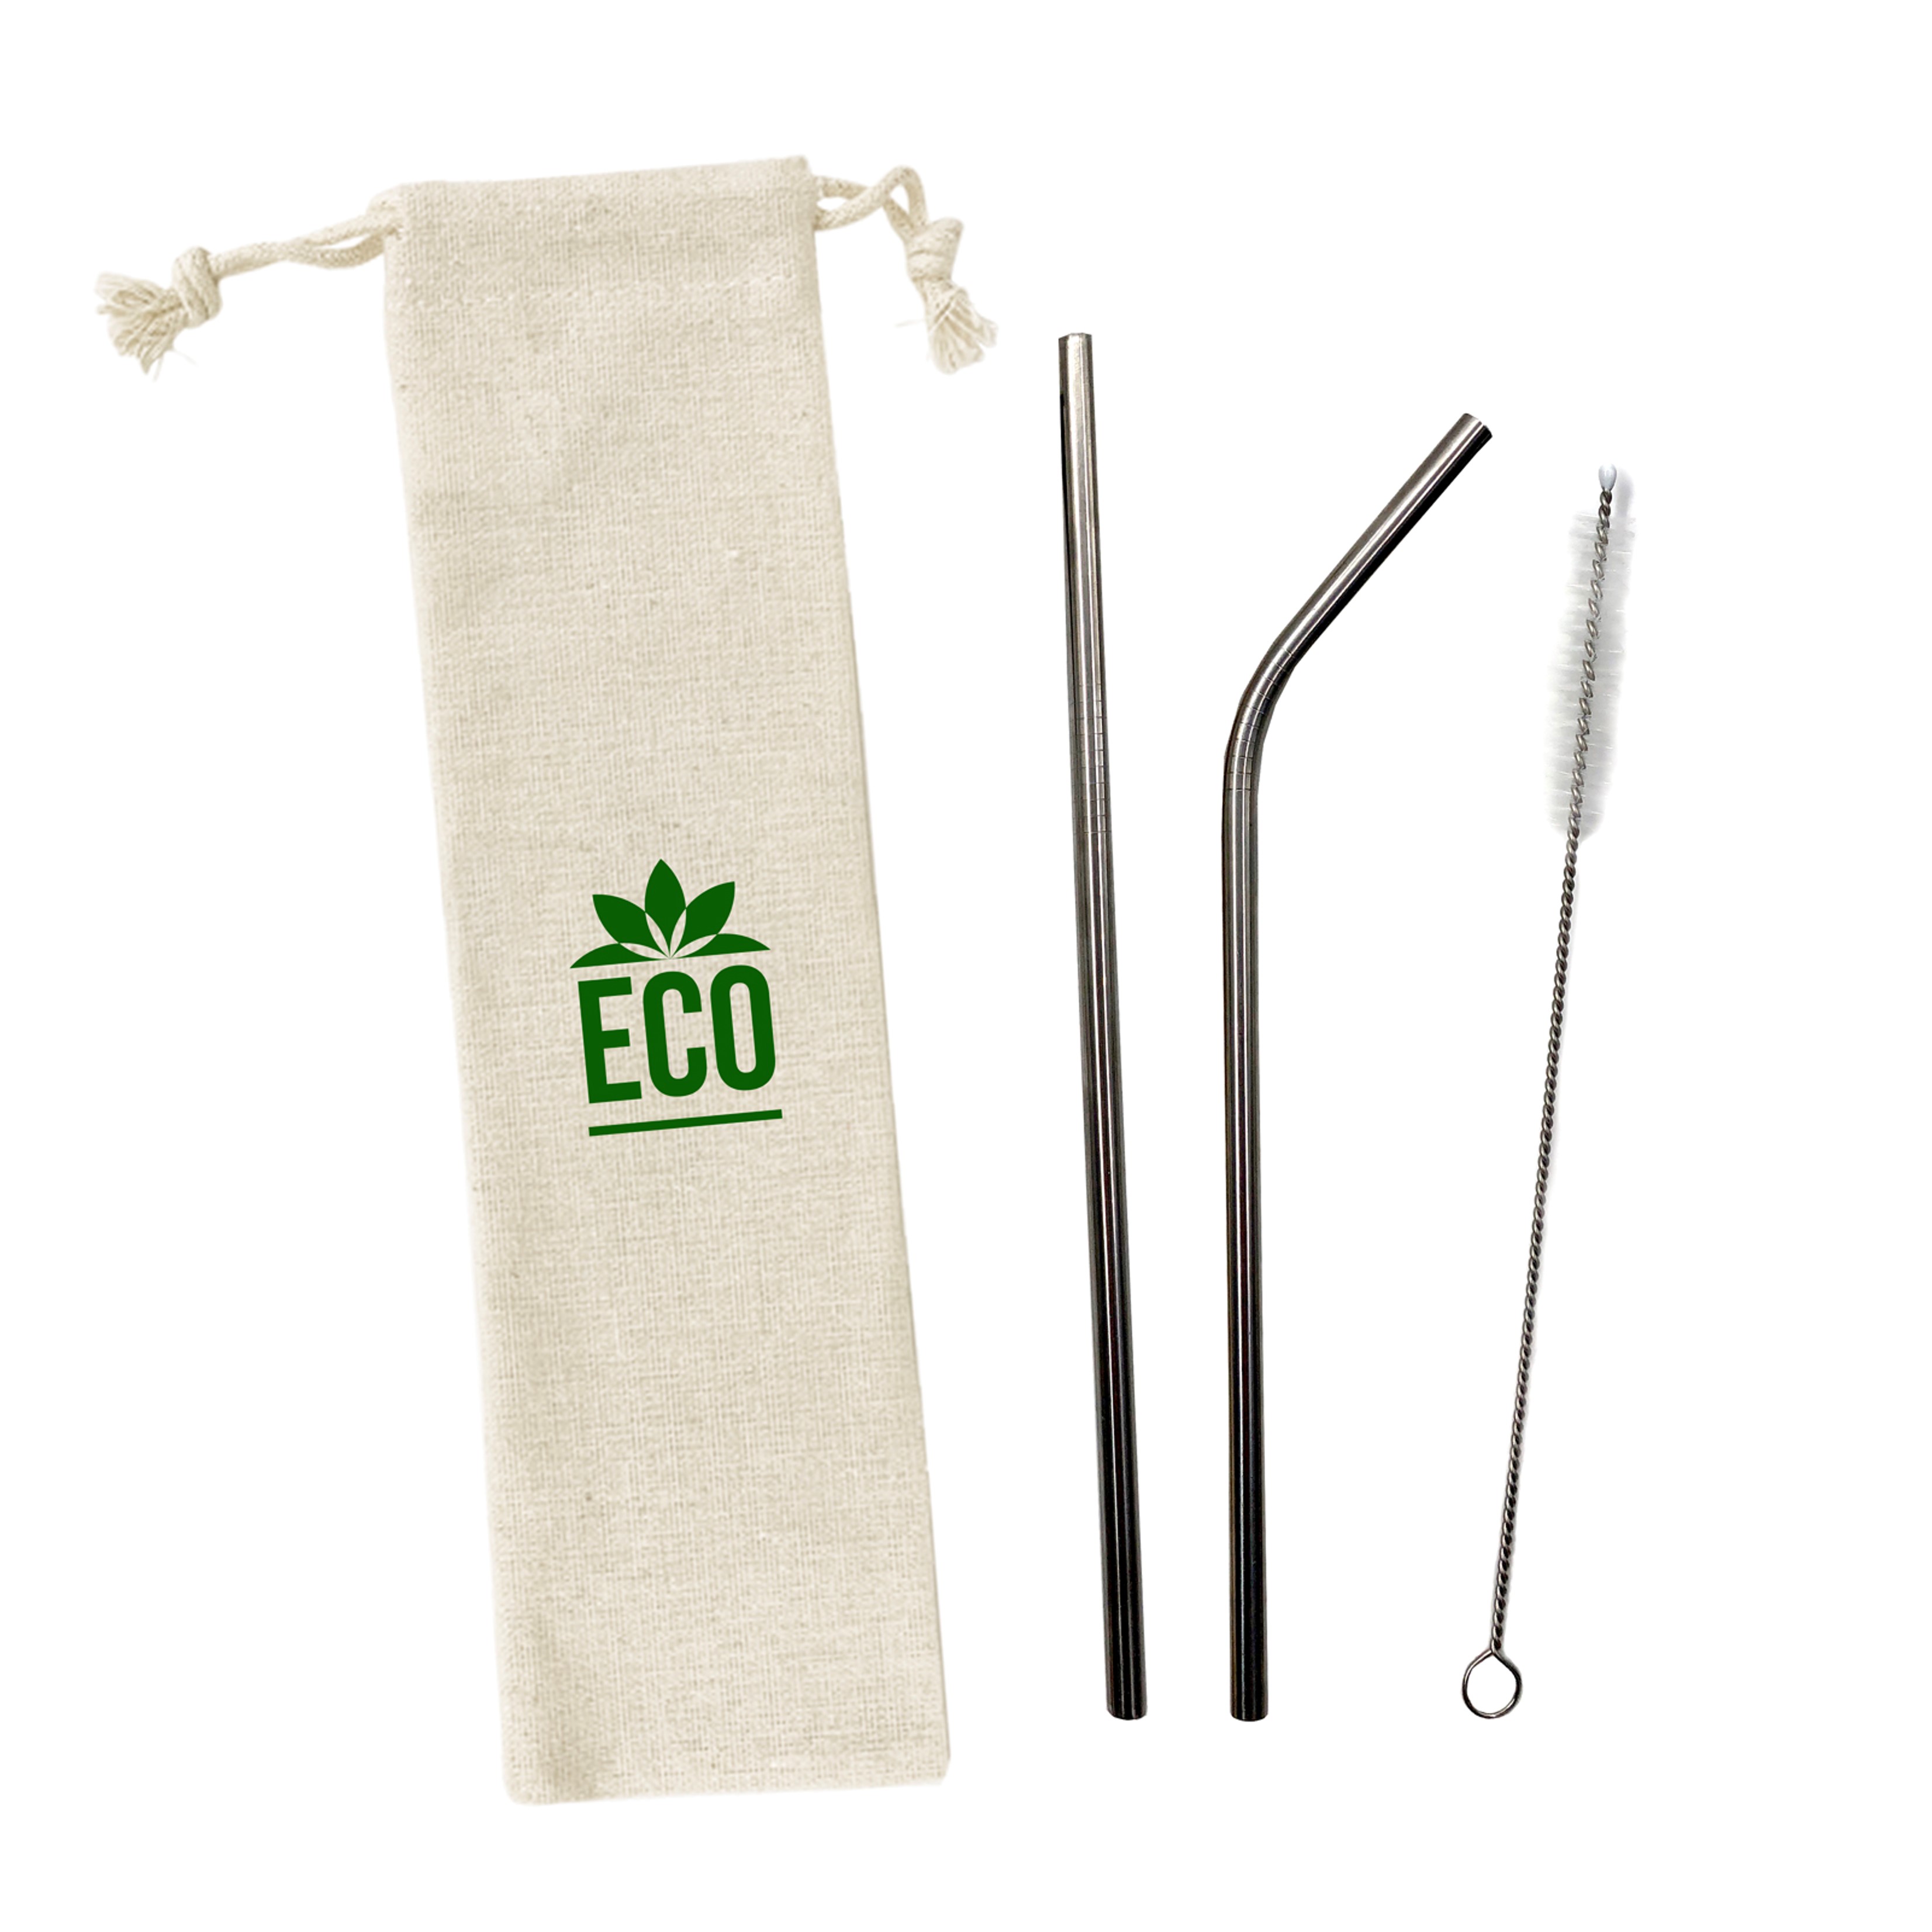 Stainless Steel Straw Set In Custom Pouch - 2 Straws & Cleaner